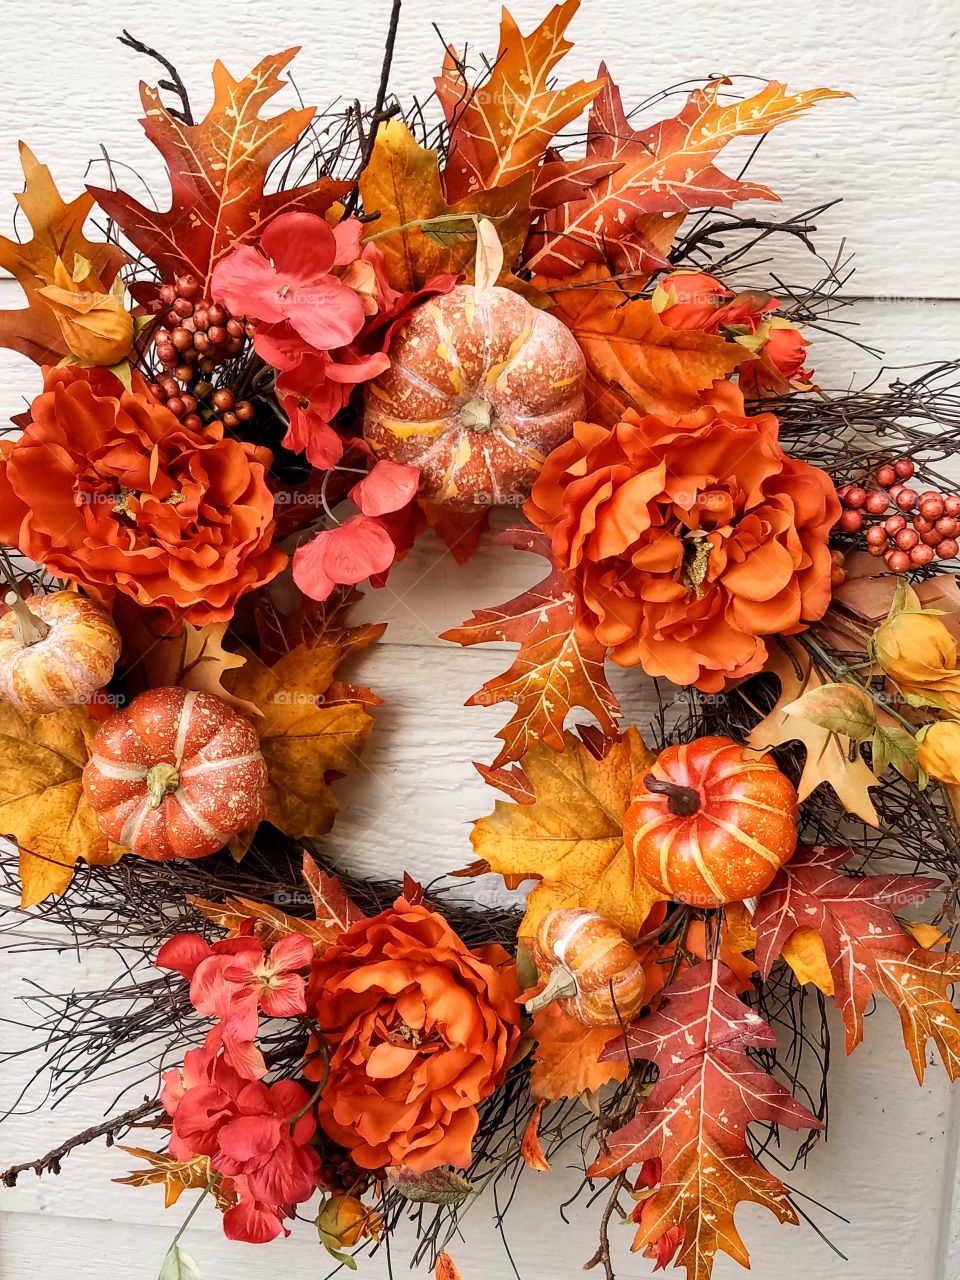 a colorful, orange and yellow, autumn,  door wreath made of small round gourds, flowers, and oak leaves against an off-white wall